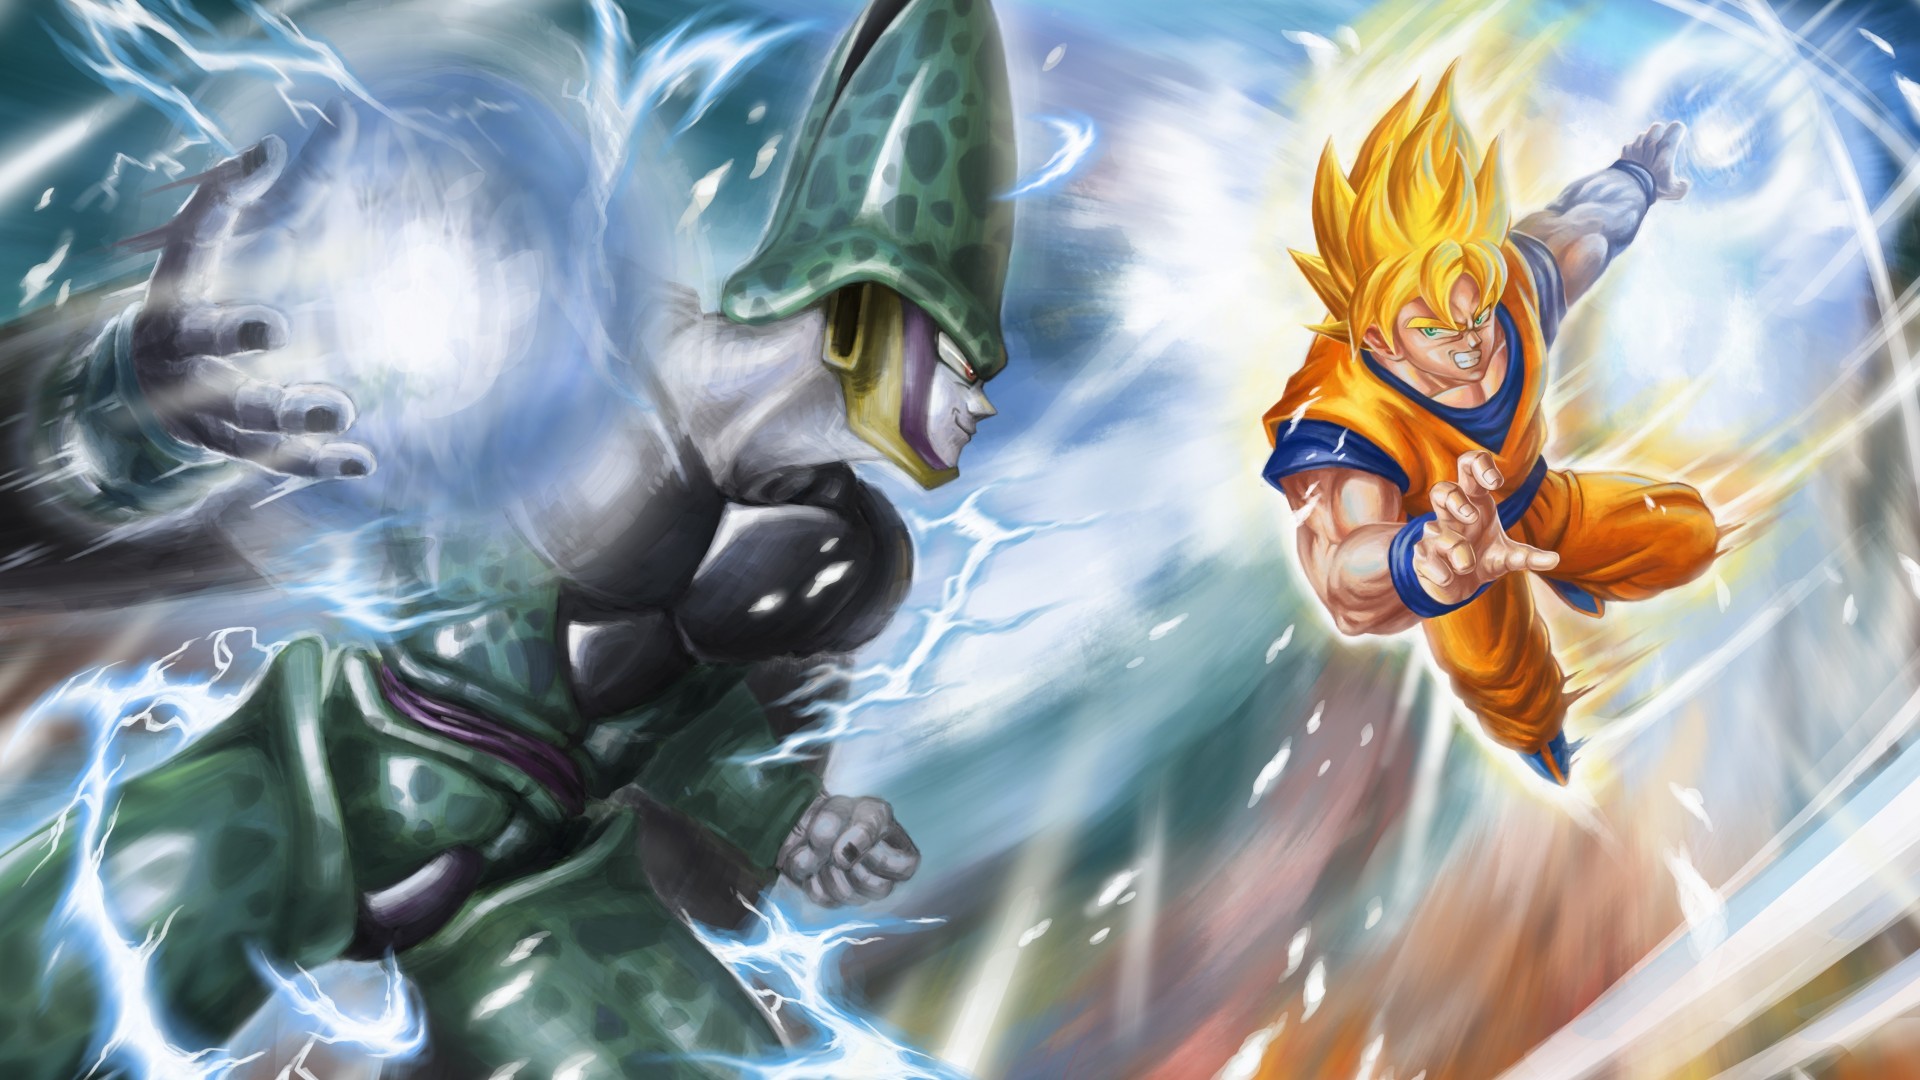 1920x1080 ... Attachment for Dragon Ball Z Wallpaper 17 of 49 - Son Goku and Cell